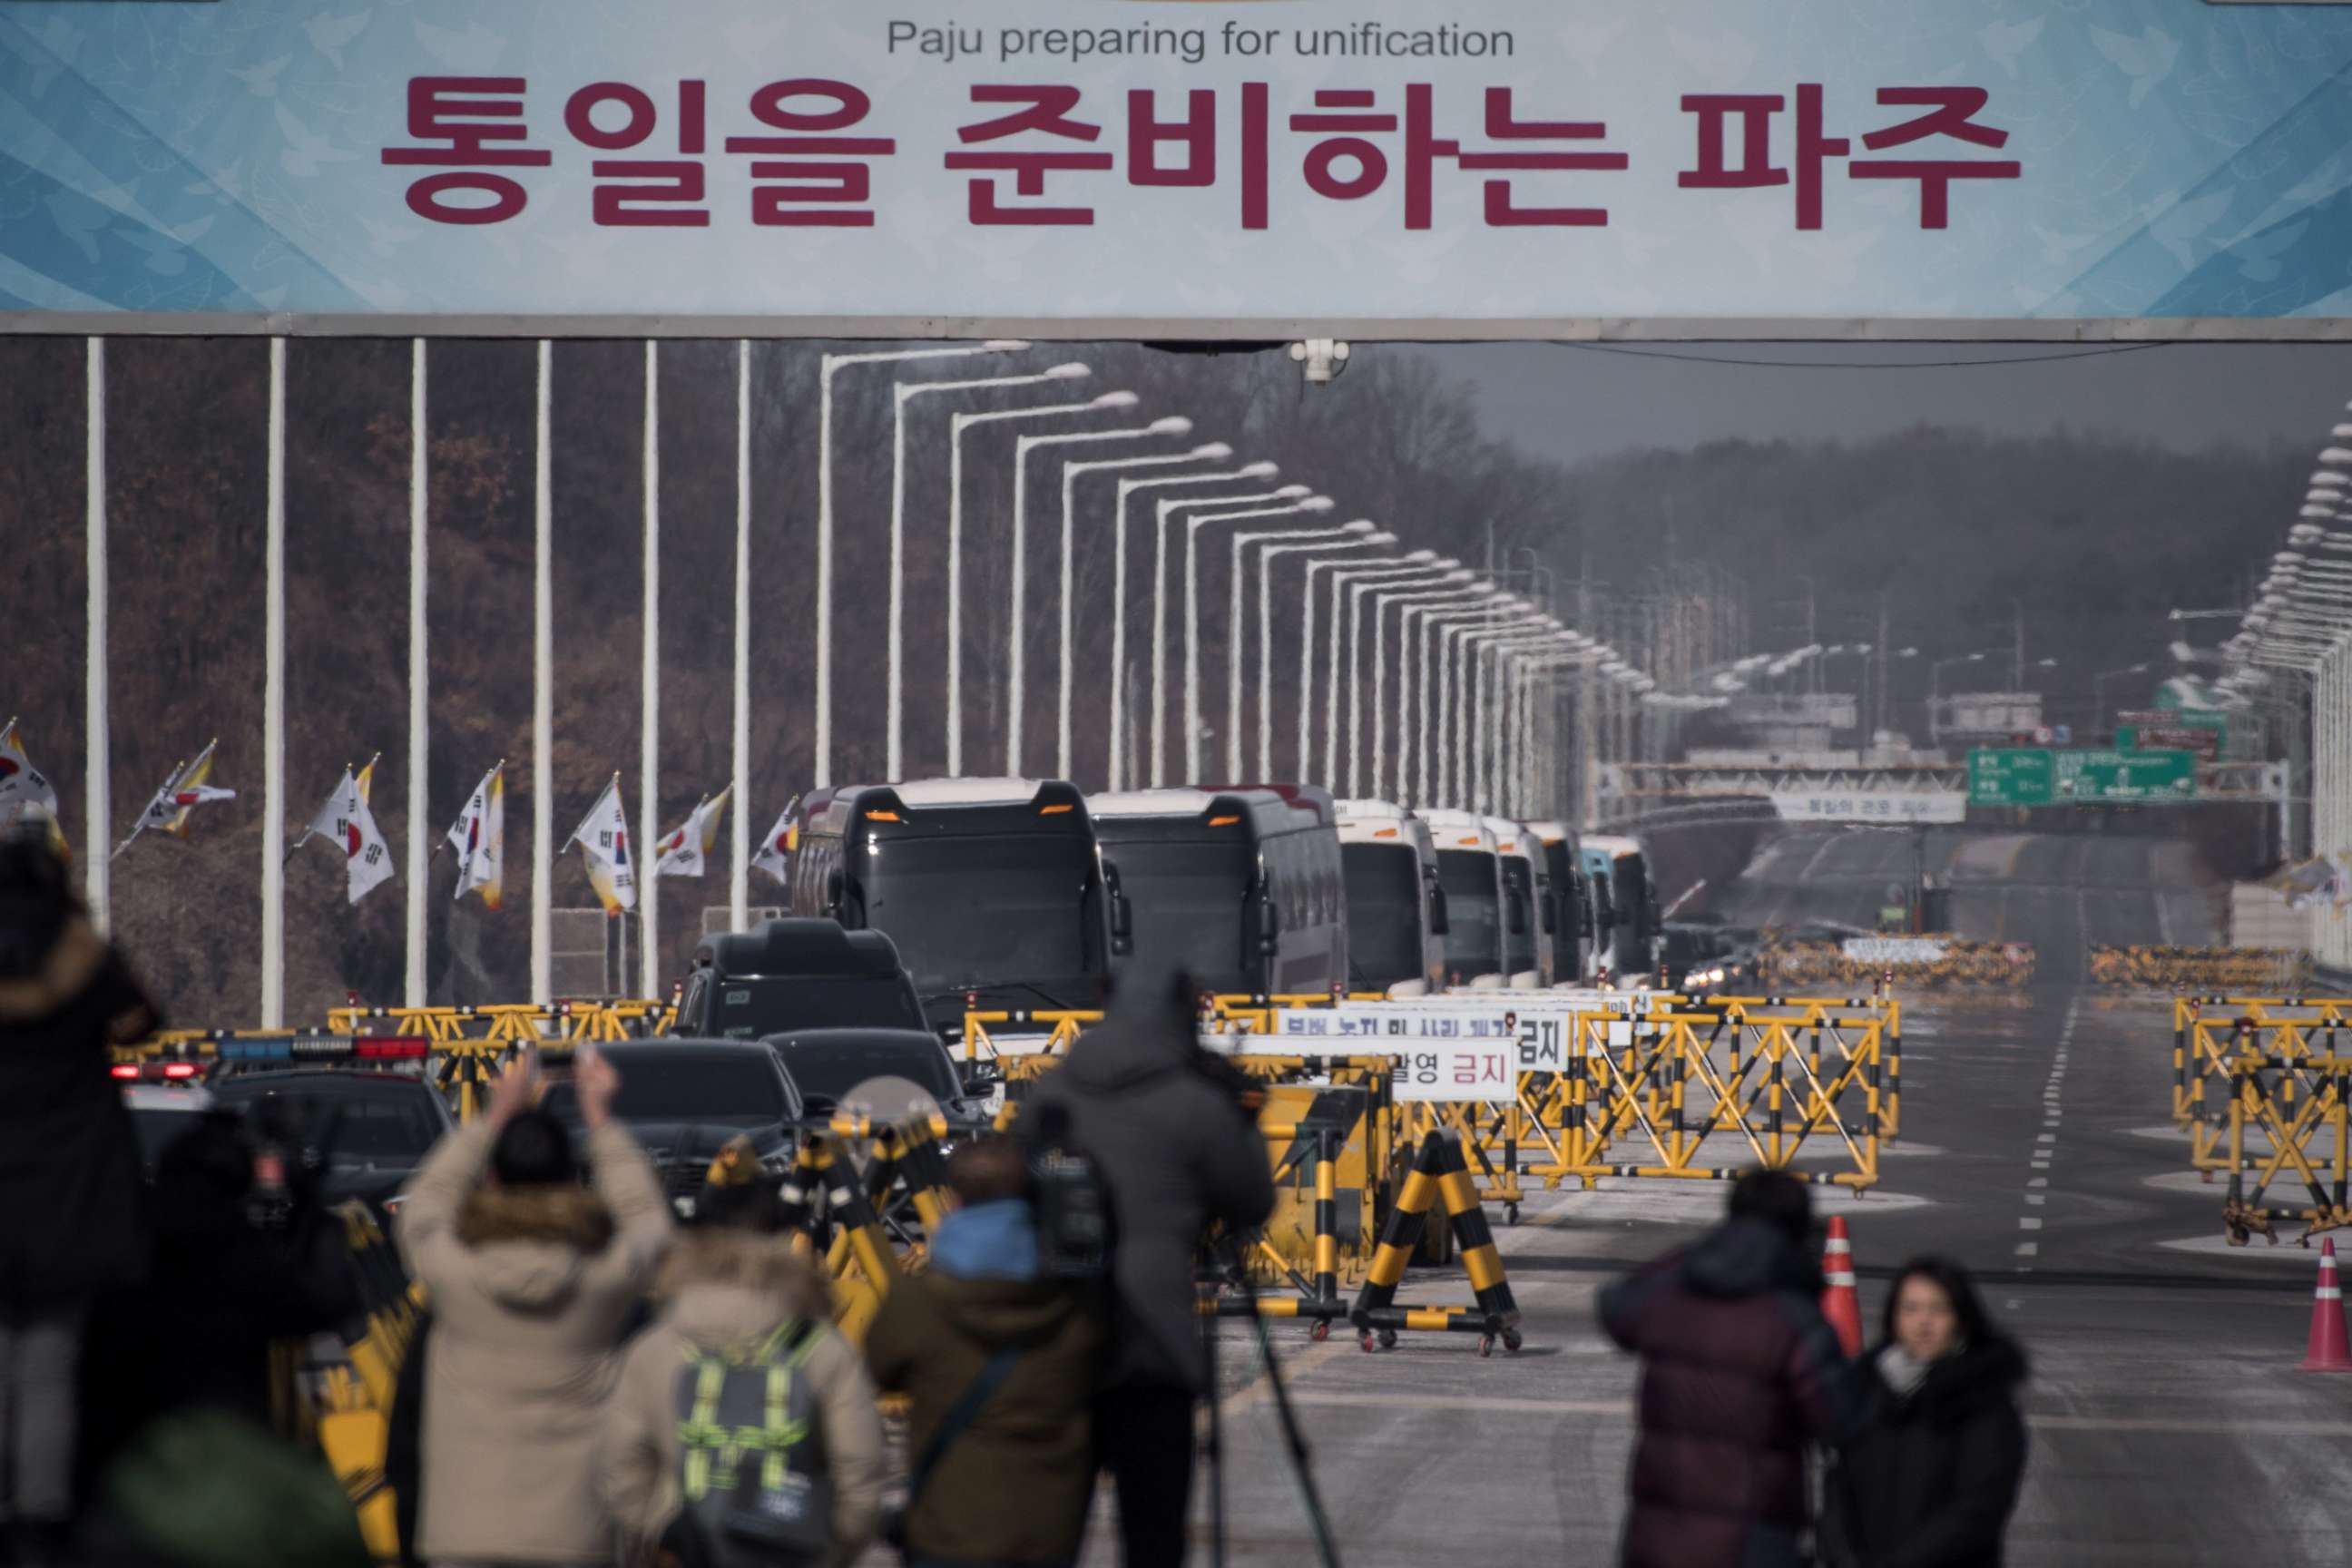 PHOTO: Busses carrying a 280-member delegation of North Korean cheerleaders crosses a checkpoint on Tongil bridge after arriving in South Korea, in Paju on February 7, 2018. 